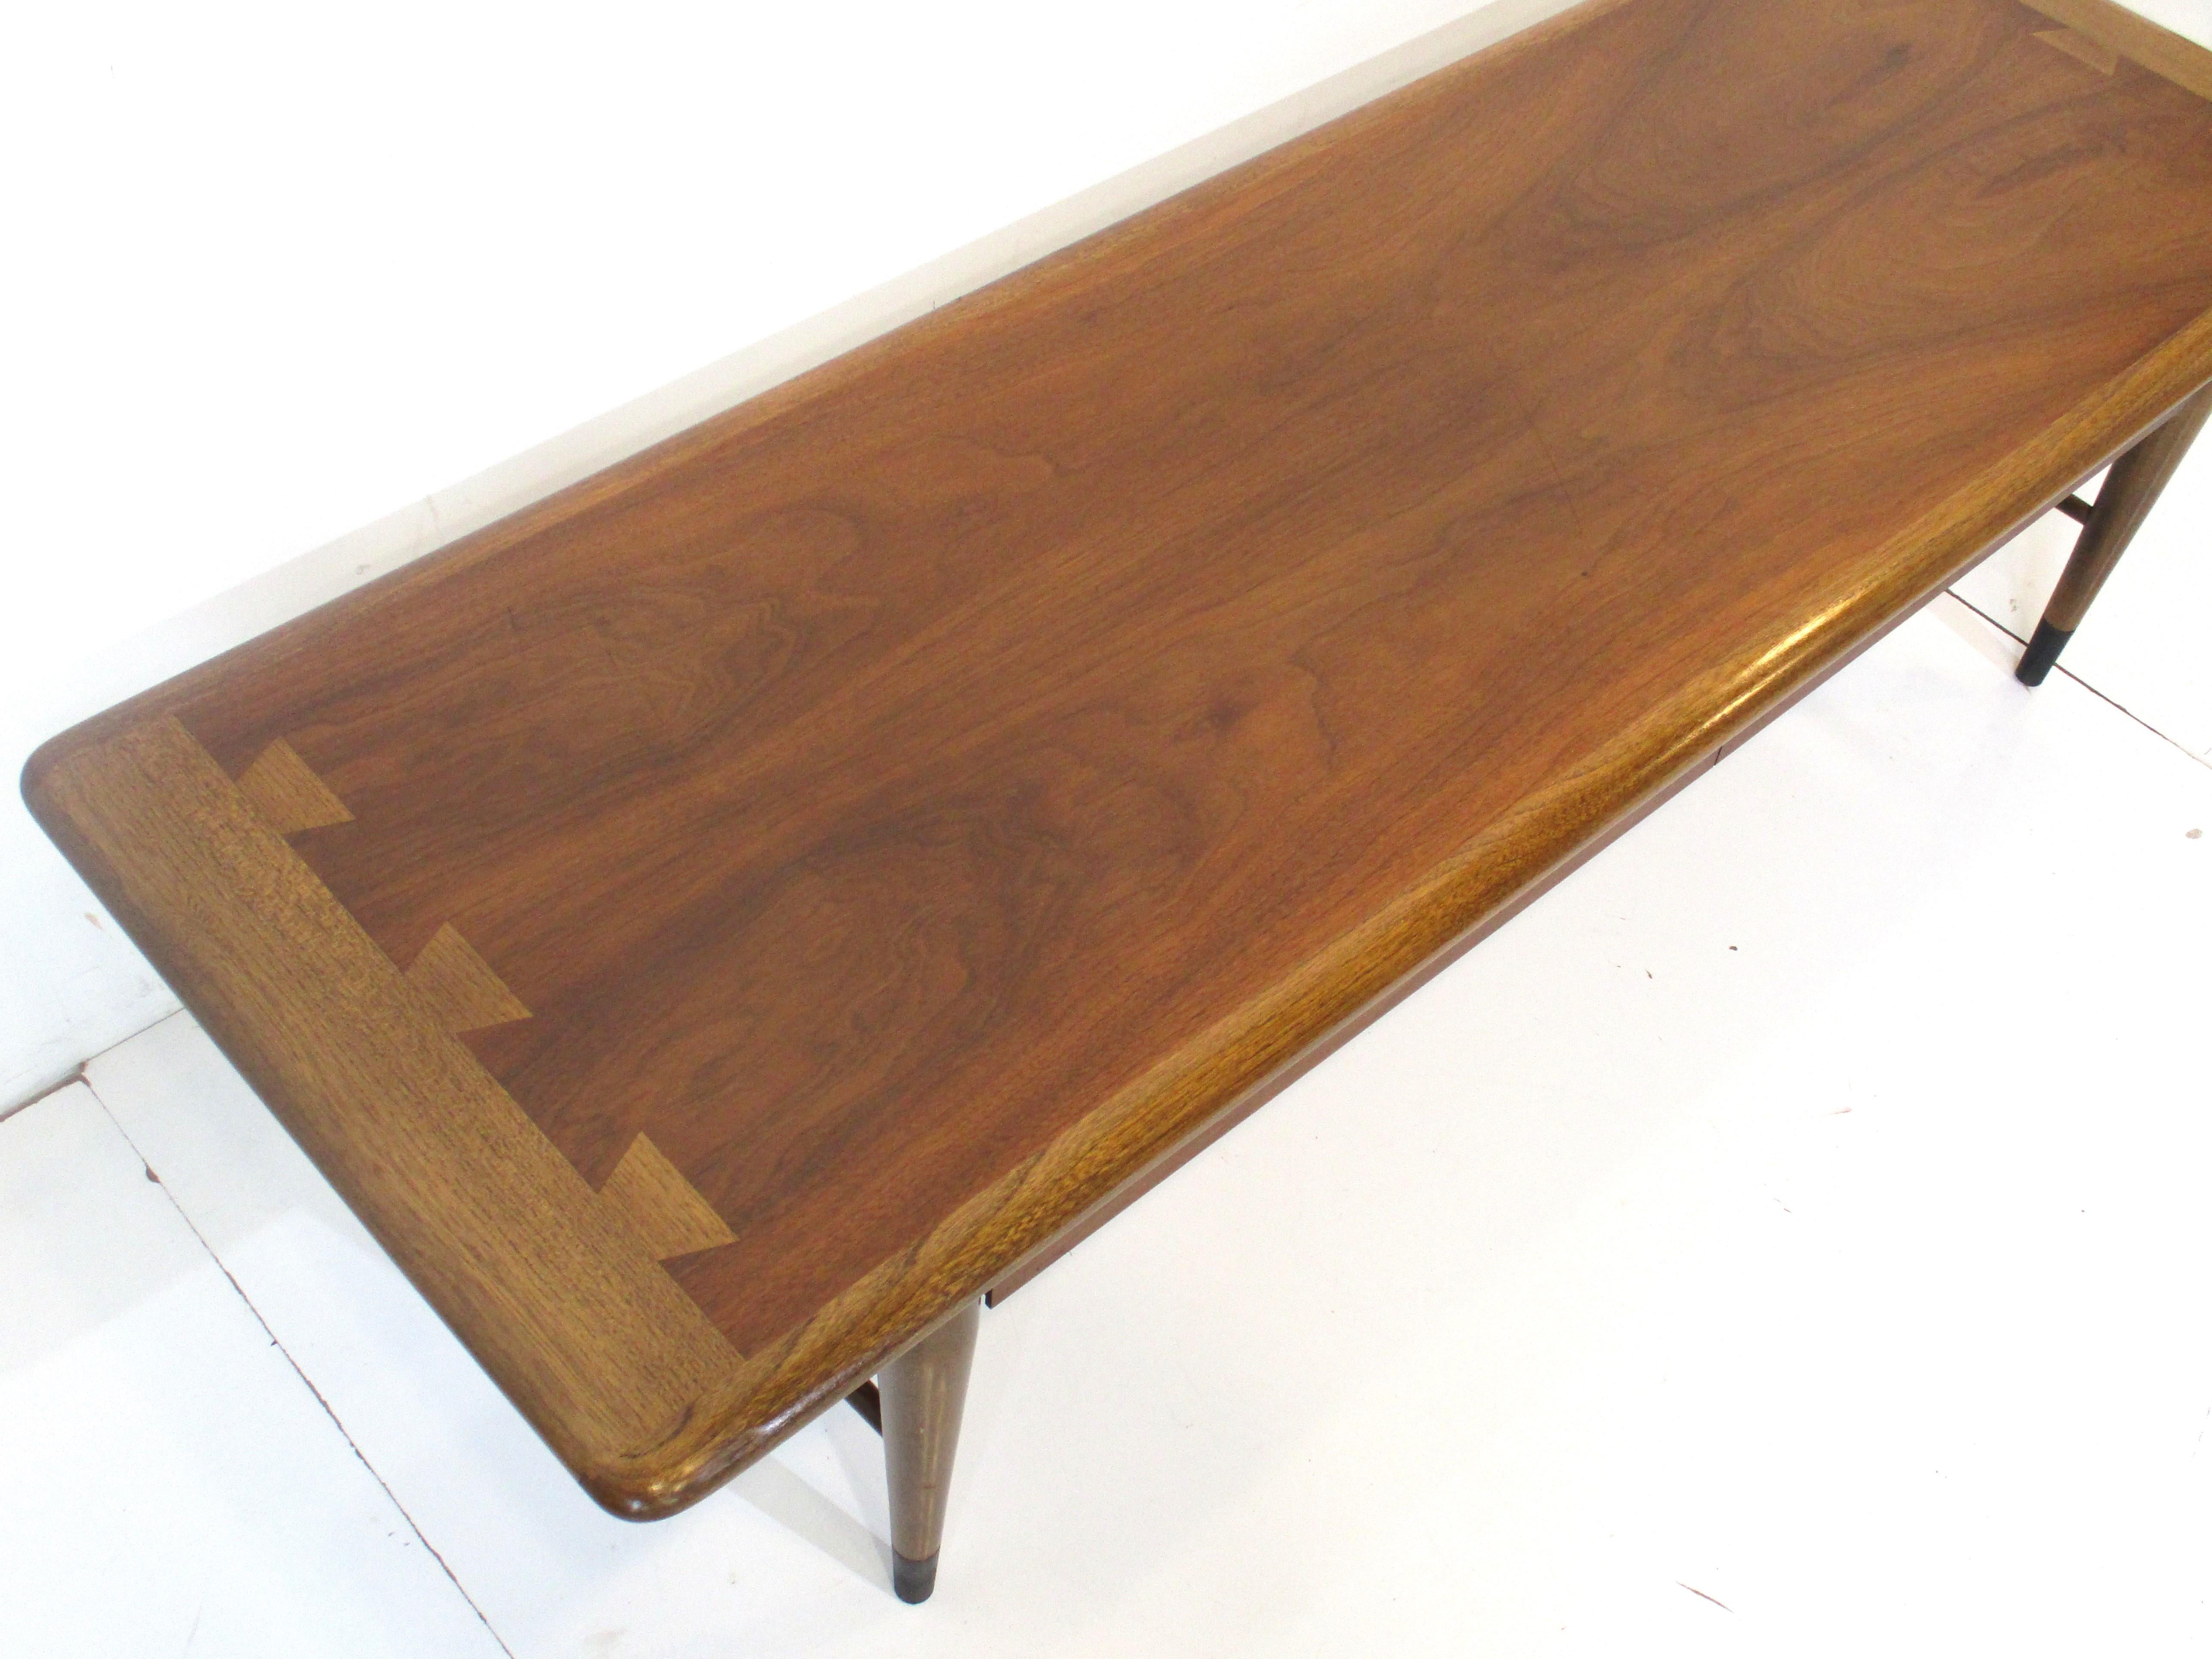 A very well crafted walnut and light mahogany long coffee table from Lane's signature Acclaim collection. The Acclaim pieces have the contrasting dovetail top design which give the piece that sharp handmade feel that the designer Andre Bus is noted